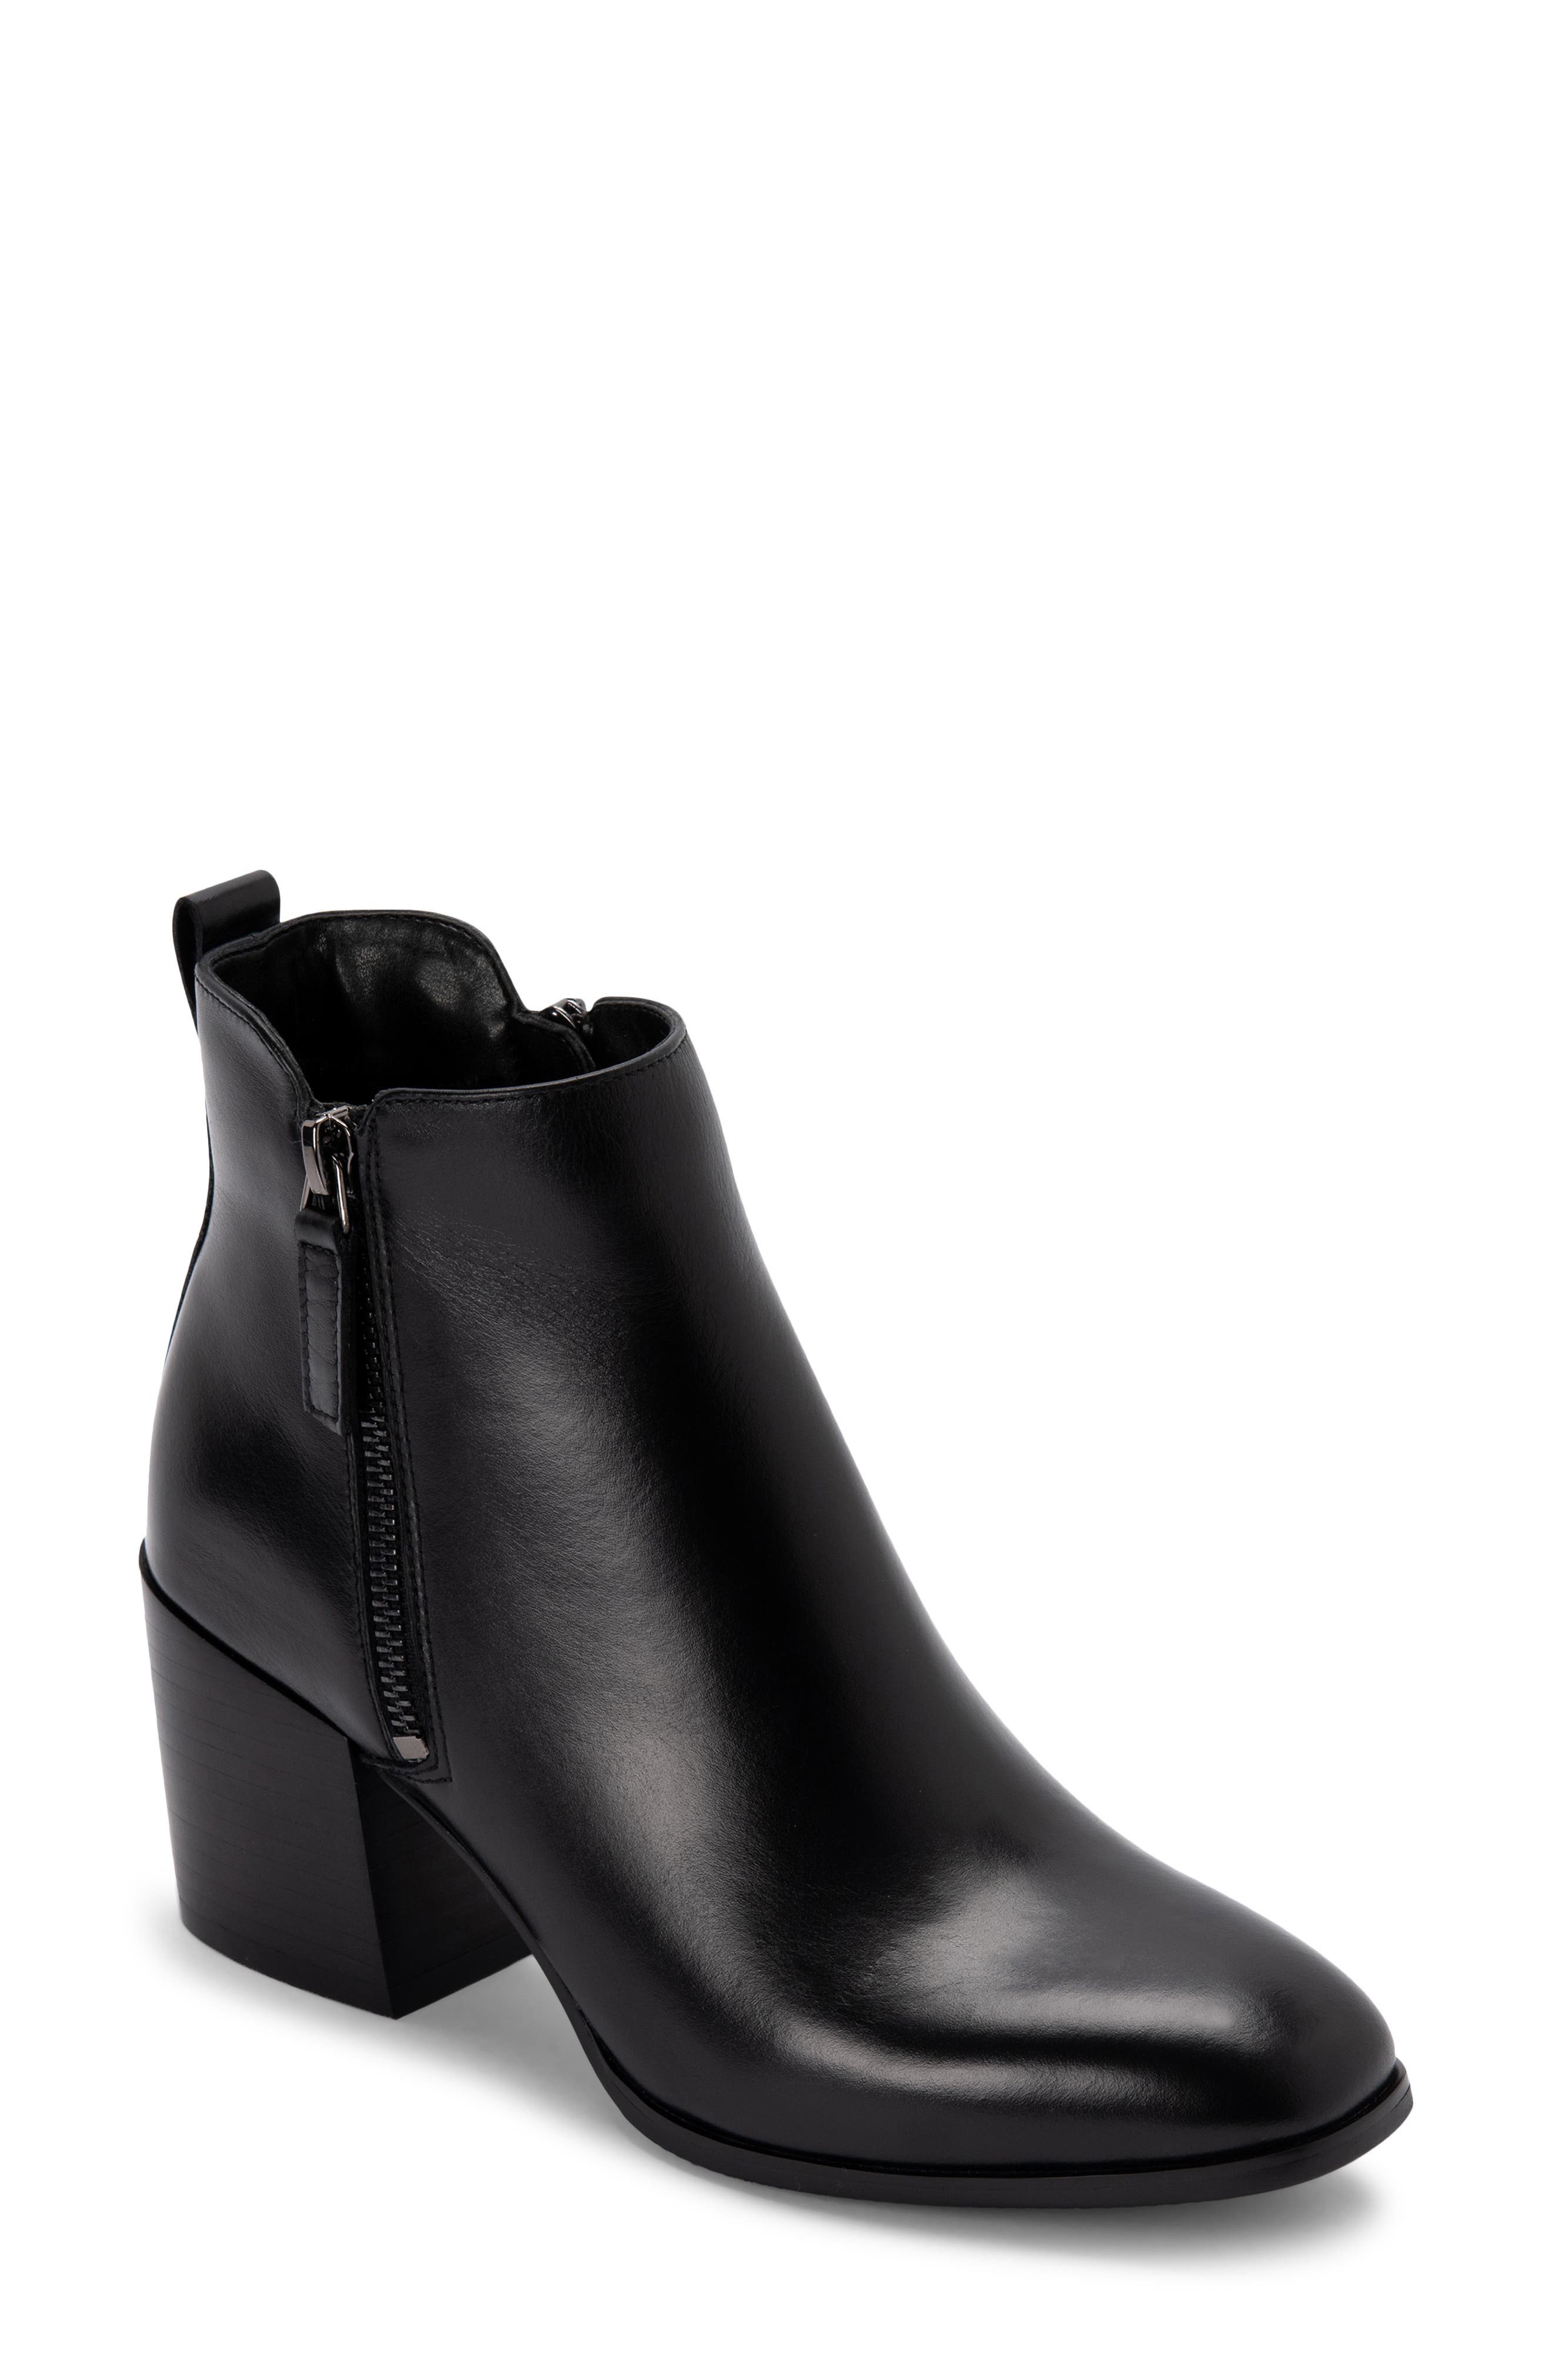 nordstrom canada womens shoes